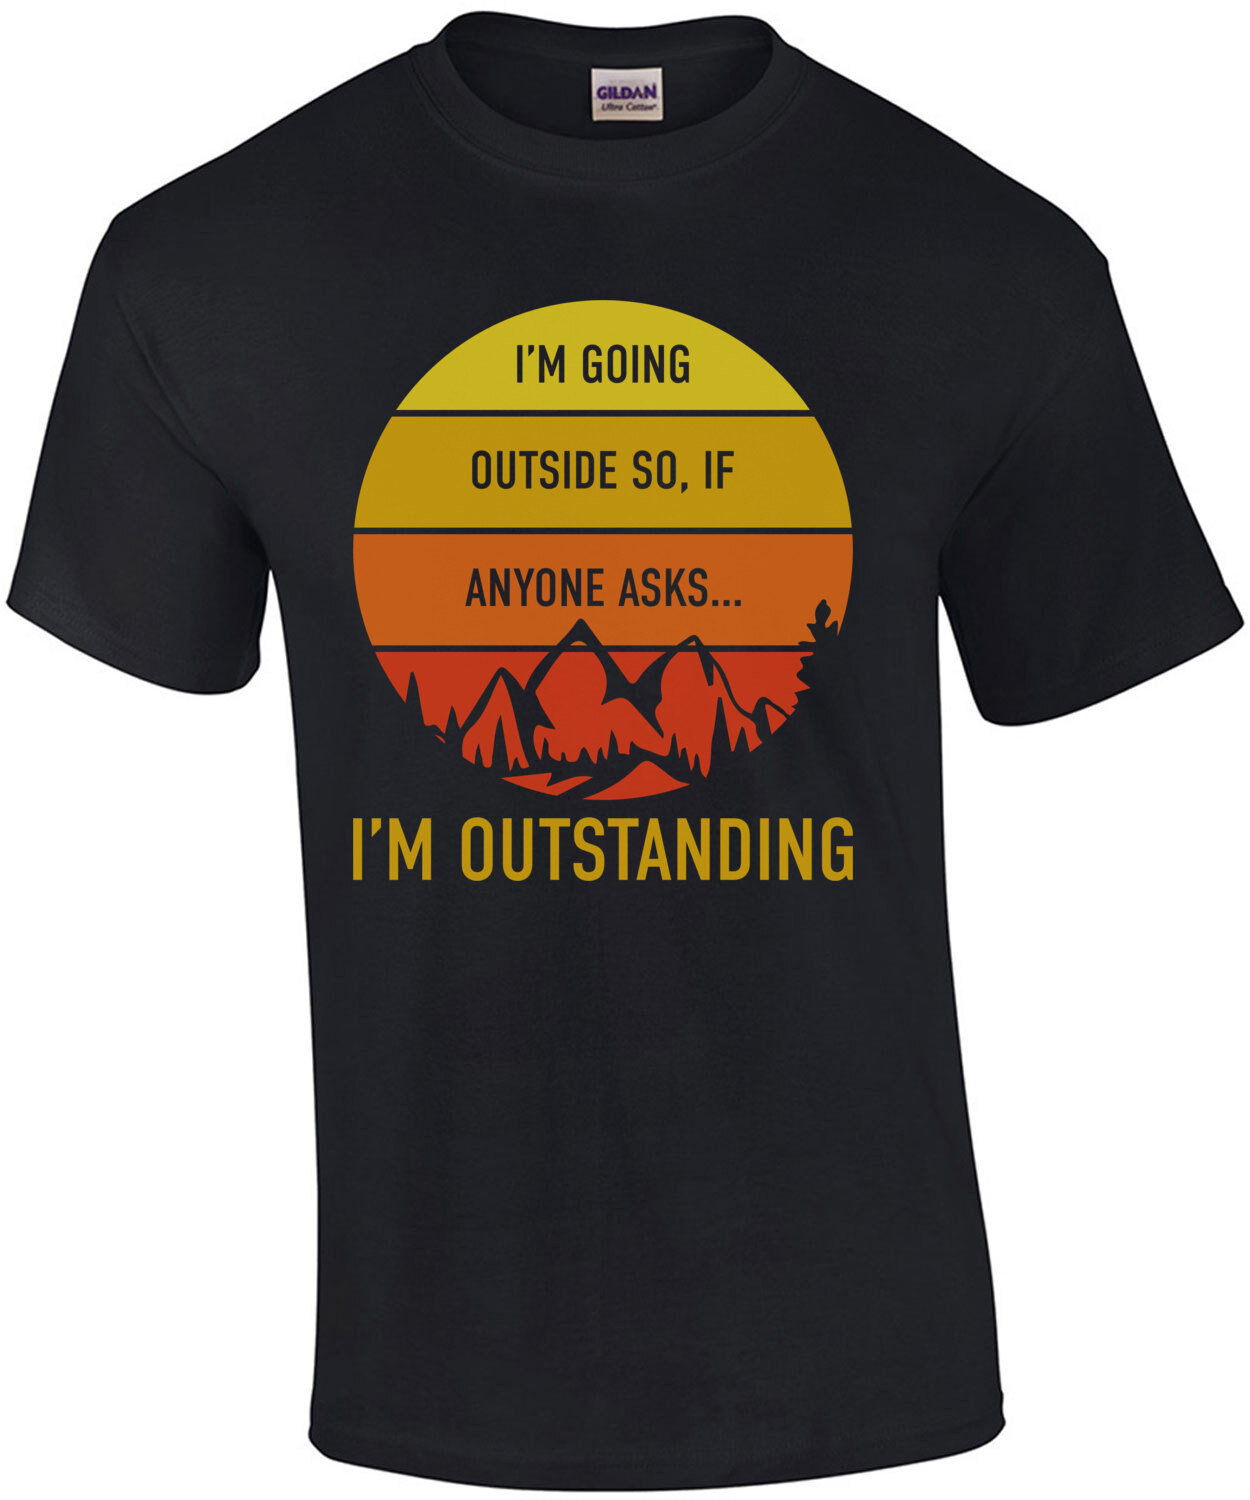 I'm going outside. so if anyone asks... I'm outstanding. Funny camping outdoors pun t-shirt